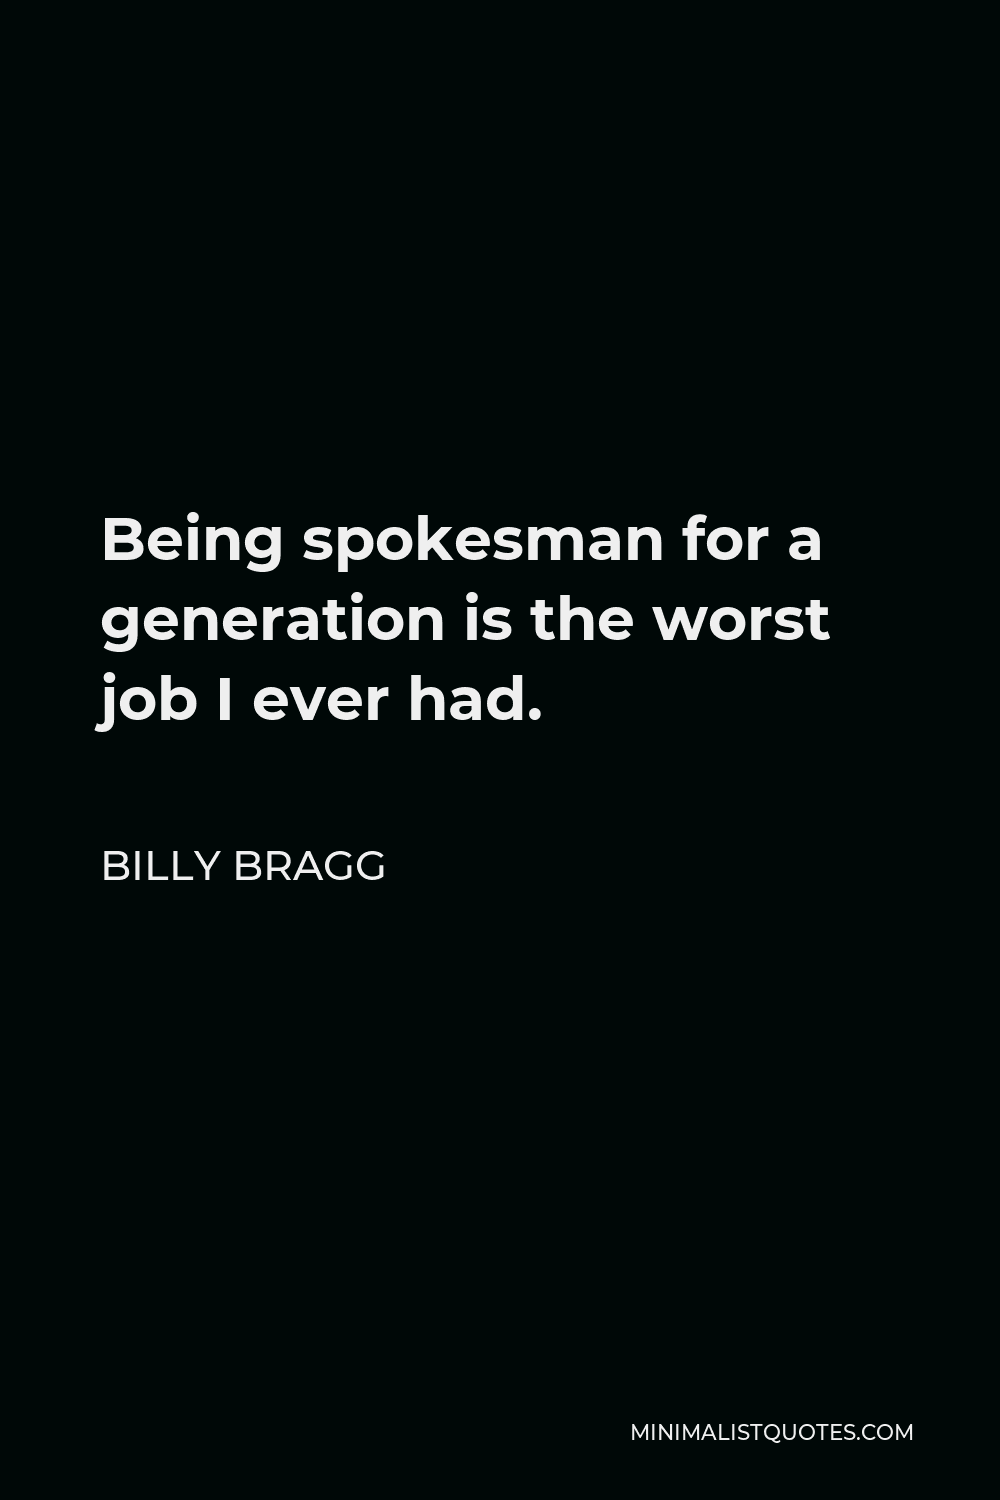 Billy Bragg Quote - Being spokesman for a generation is the worst job I ever had.